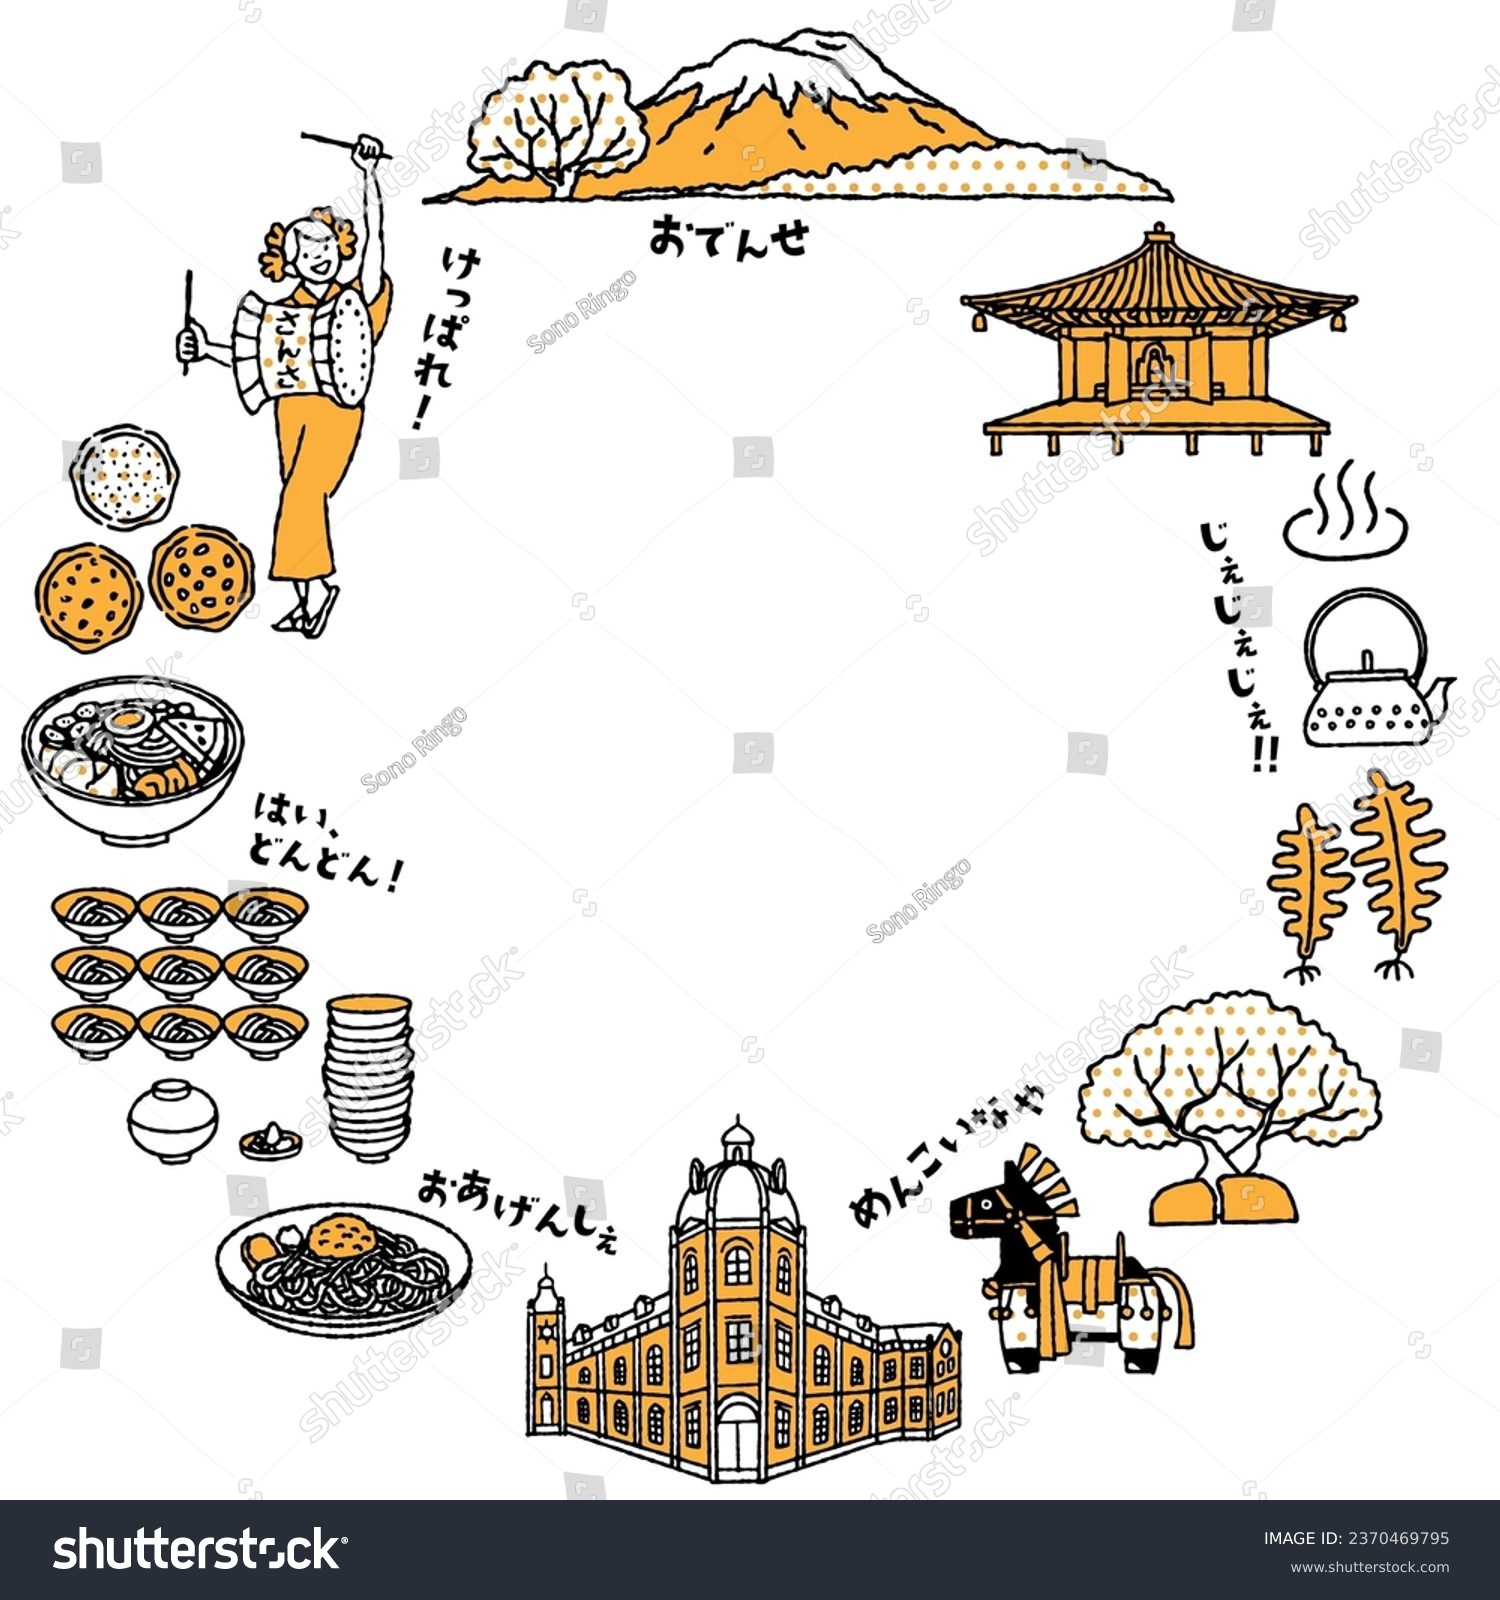 SVG of simple and cute Iwate prefecture related illustration set (2-color)

The meaning of the Japanese characters is 